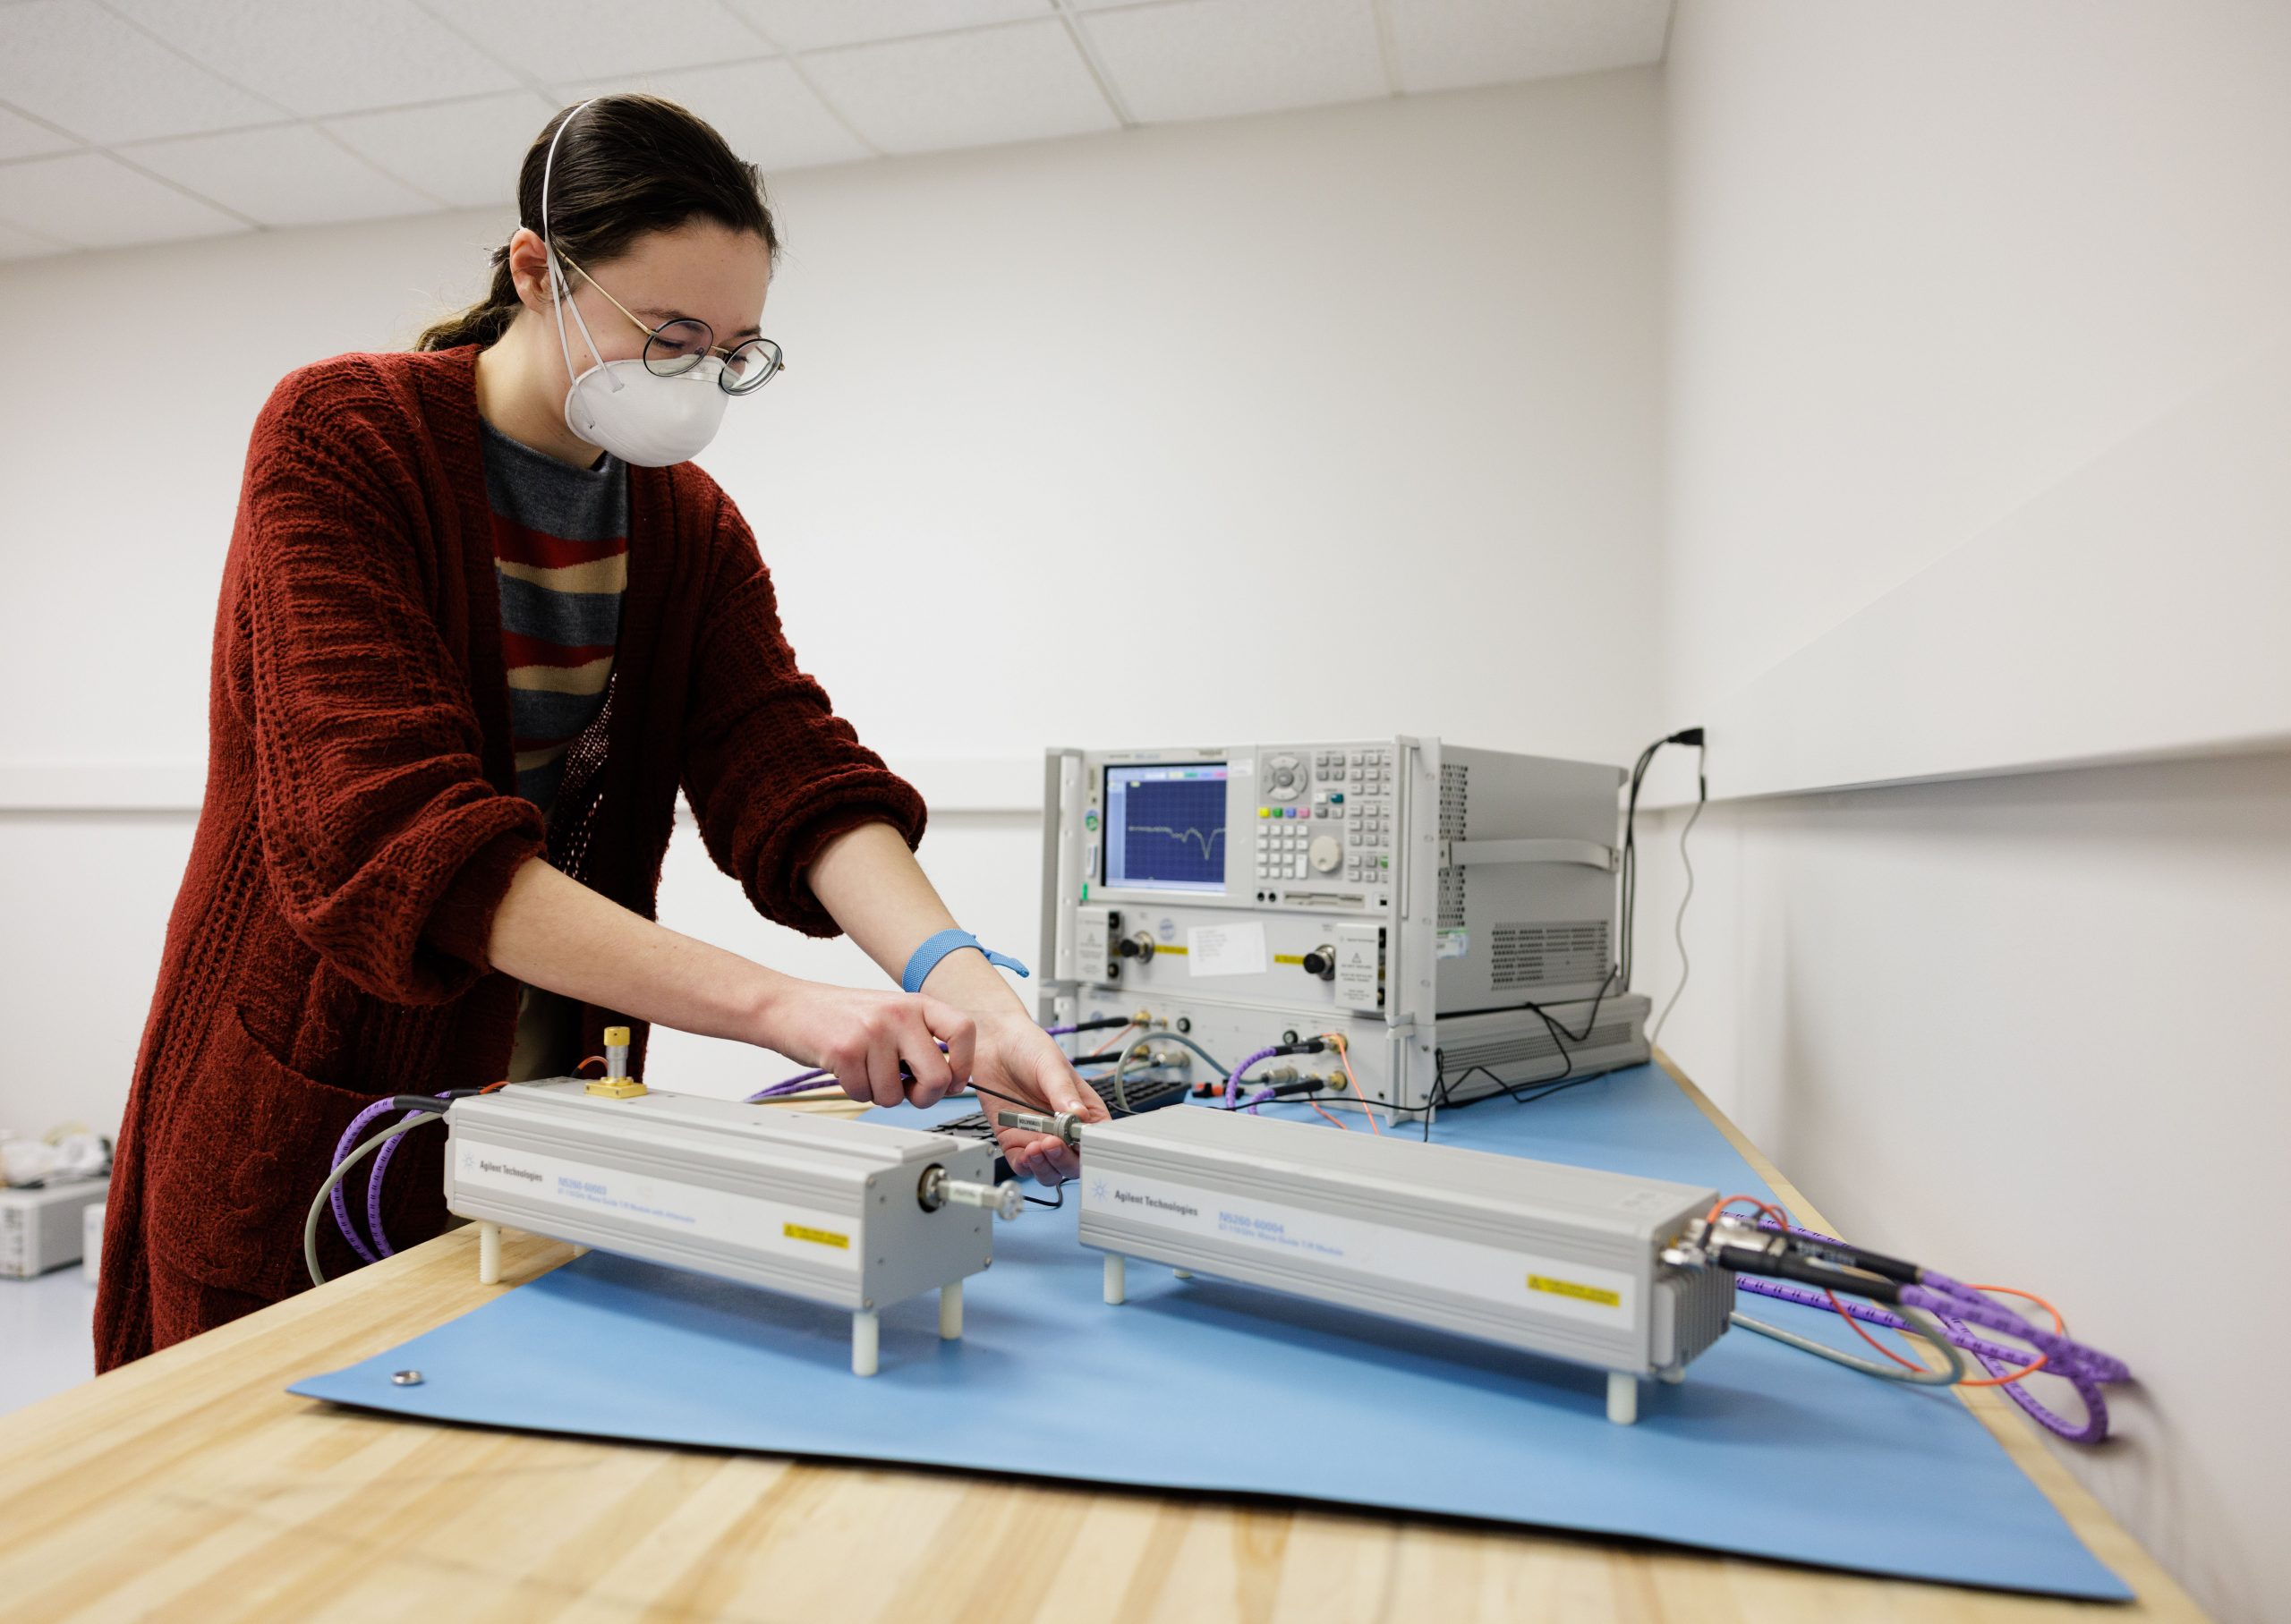 A researcher stands over an instrument while she calibrates it